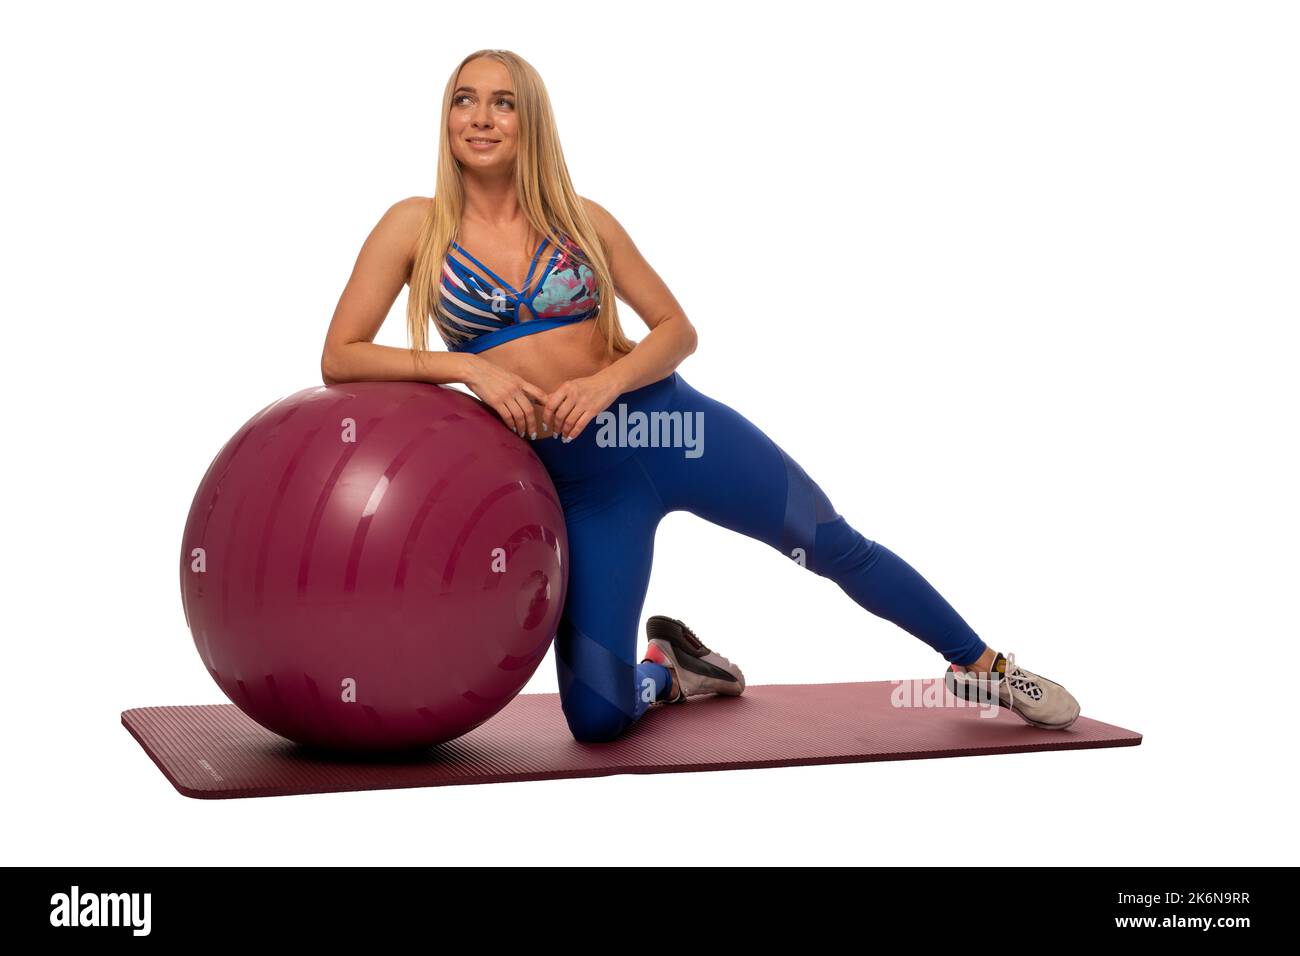 Fit woman doing exercises on fitness ball Stock Photo